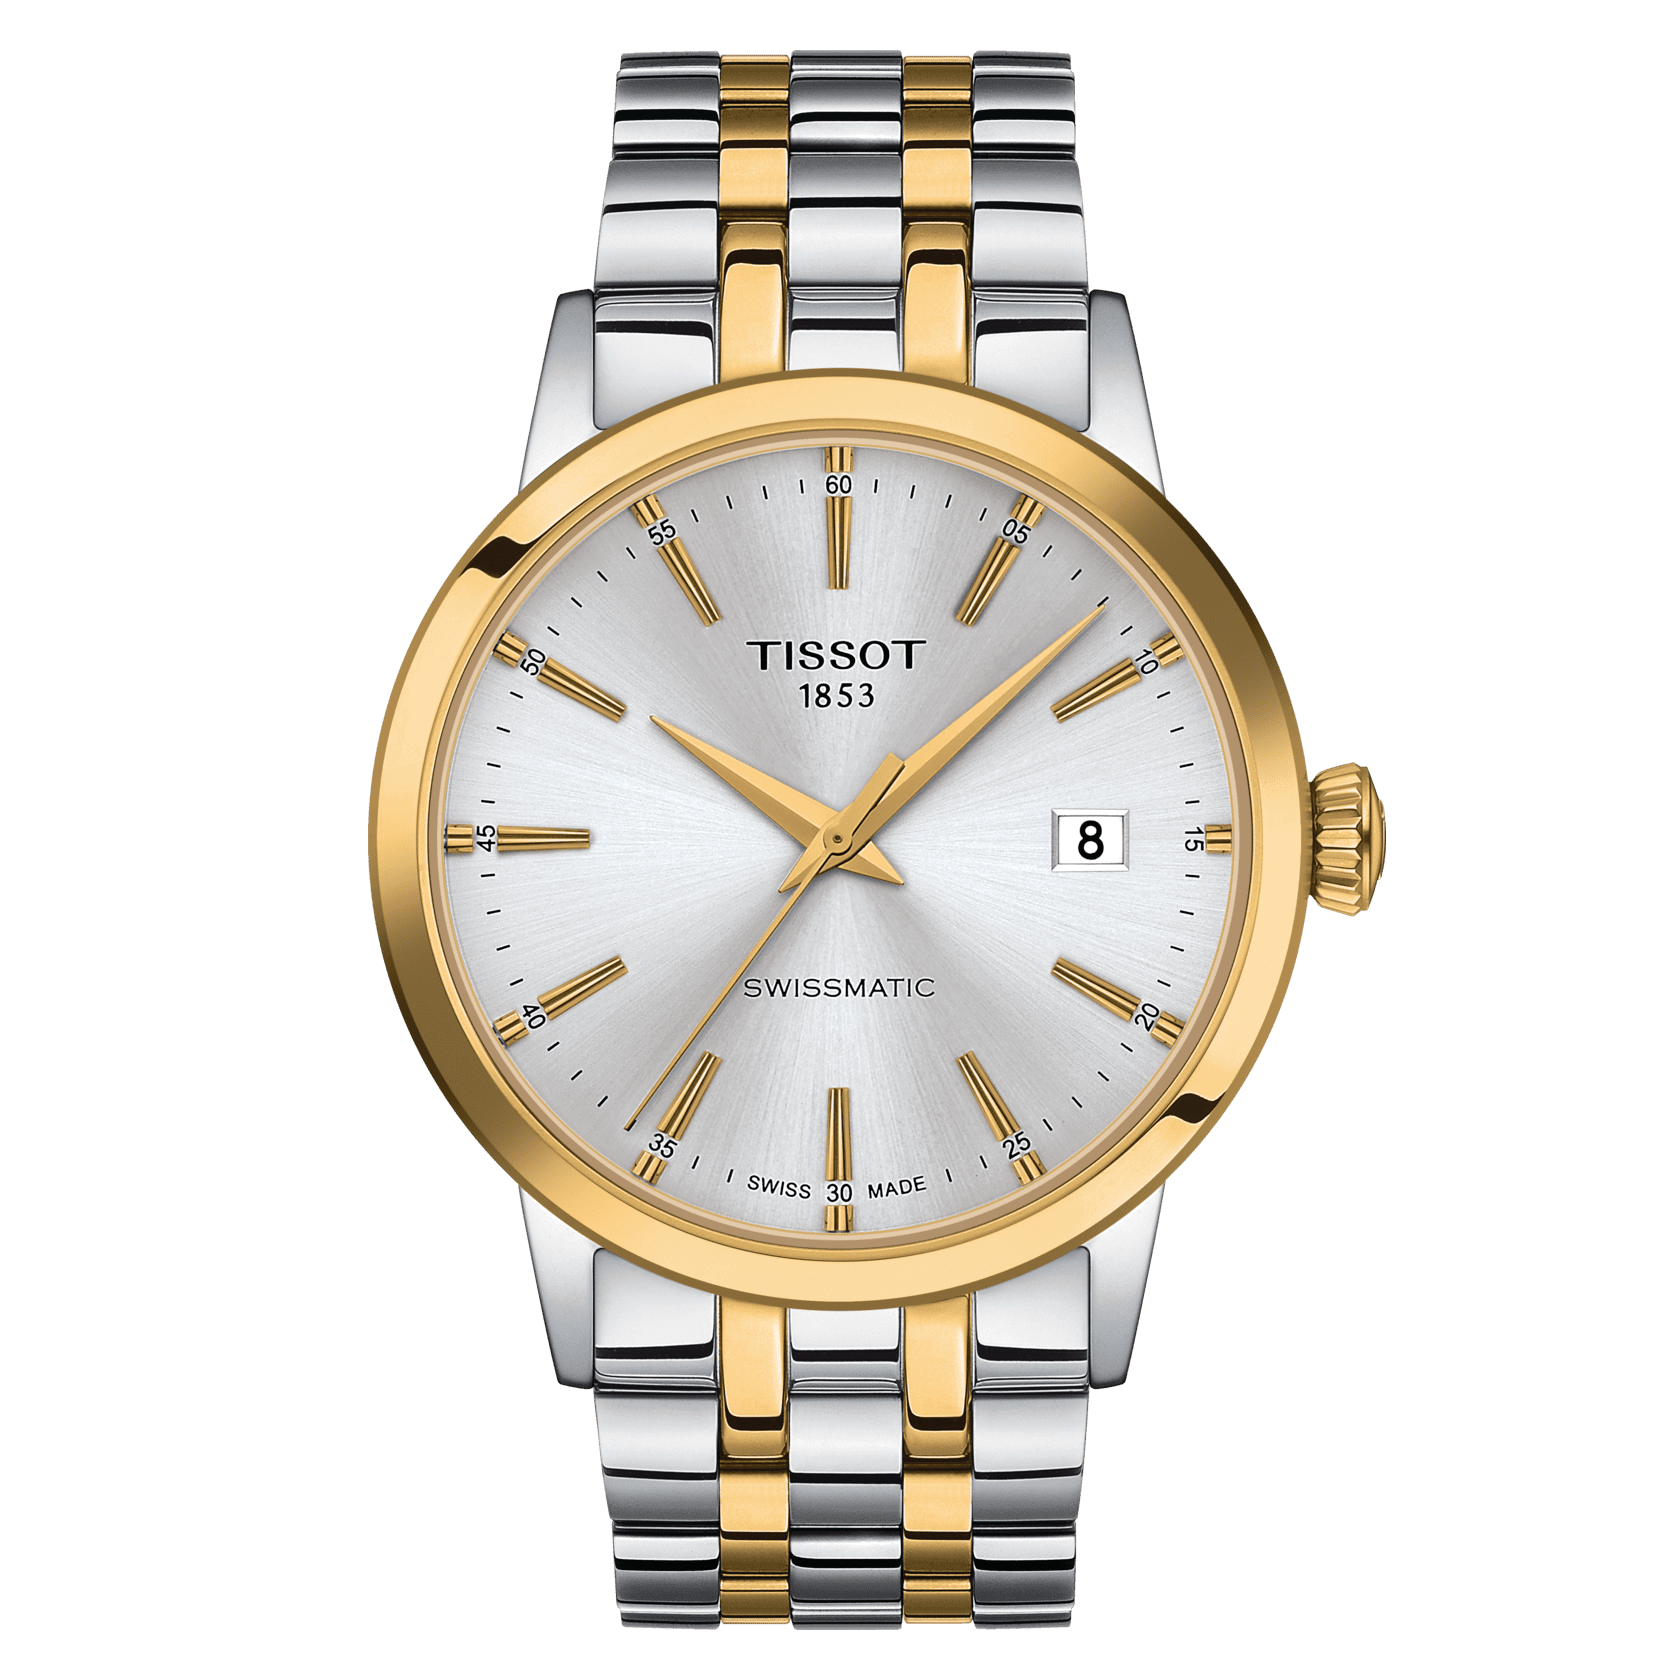 TISSOT CLASSIC DREAM SWISSMATIC (T129.407.22.031.01)
42mm Round Case
See-through caseback
Scratch-resistant sapphire crystal with antireflective coating
Swiss Tissot automatic with power reserve of 72 hours
Silver dial with indexes
316L stainless st